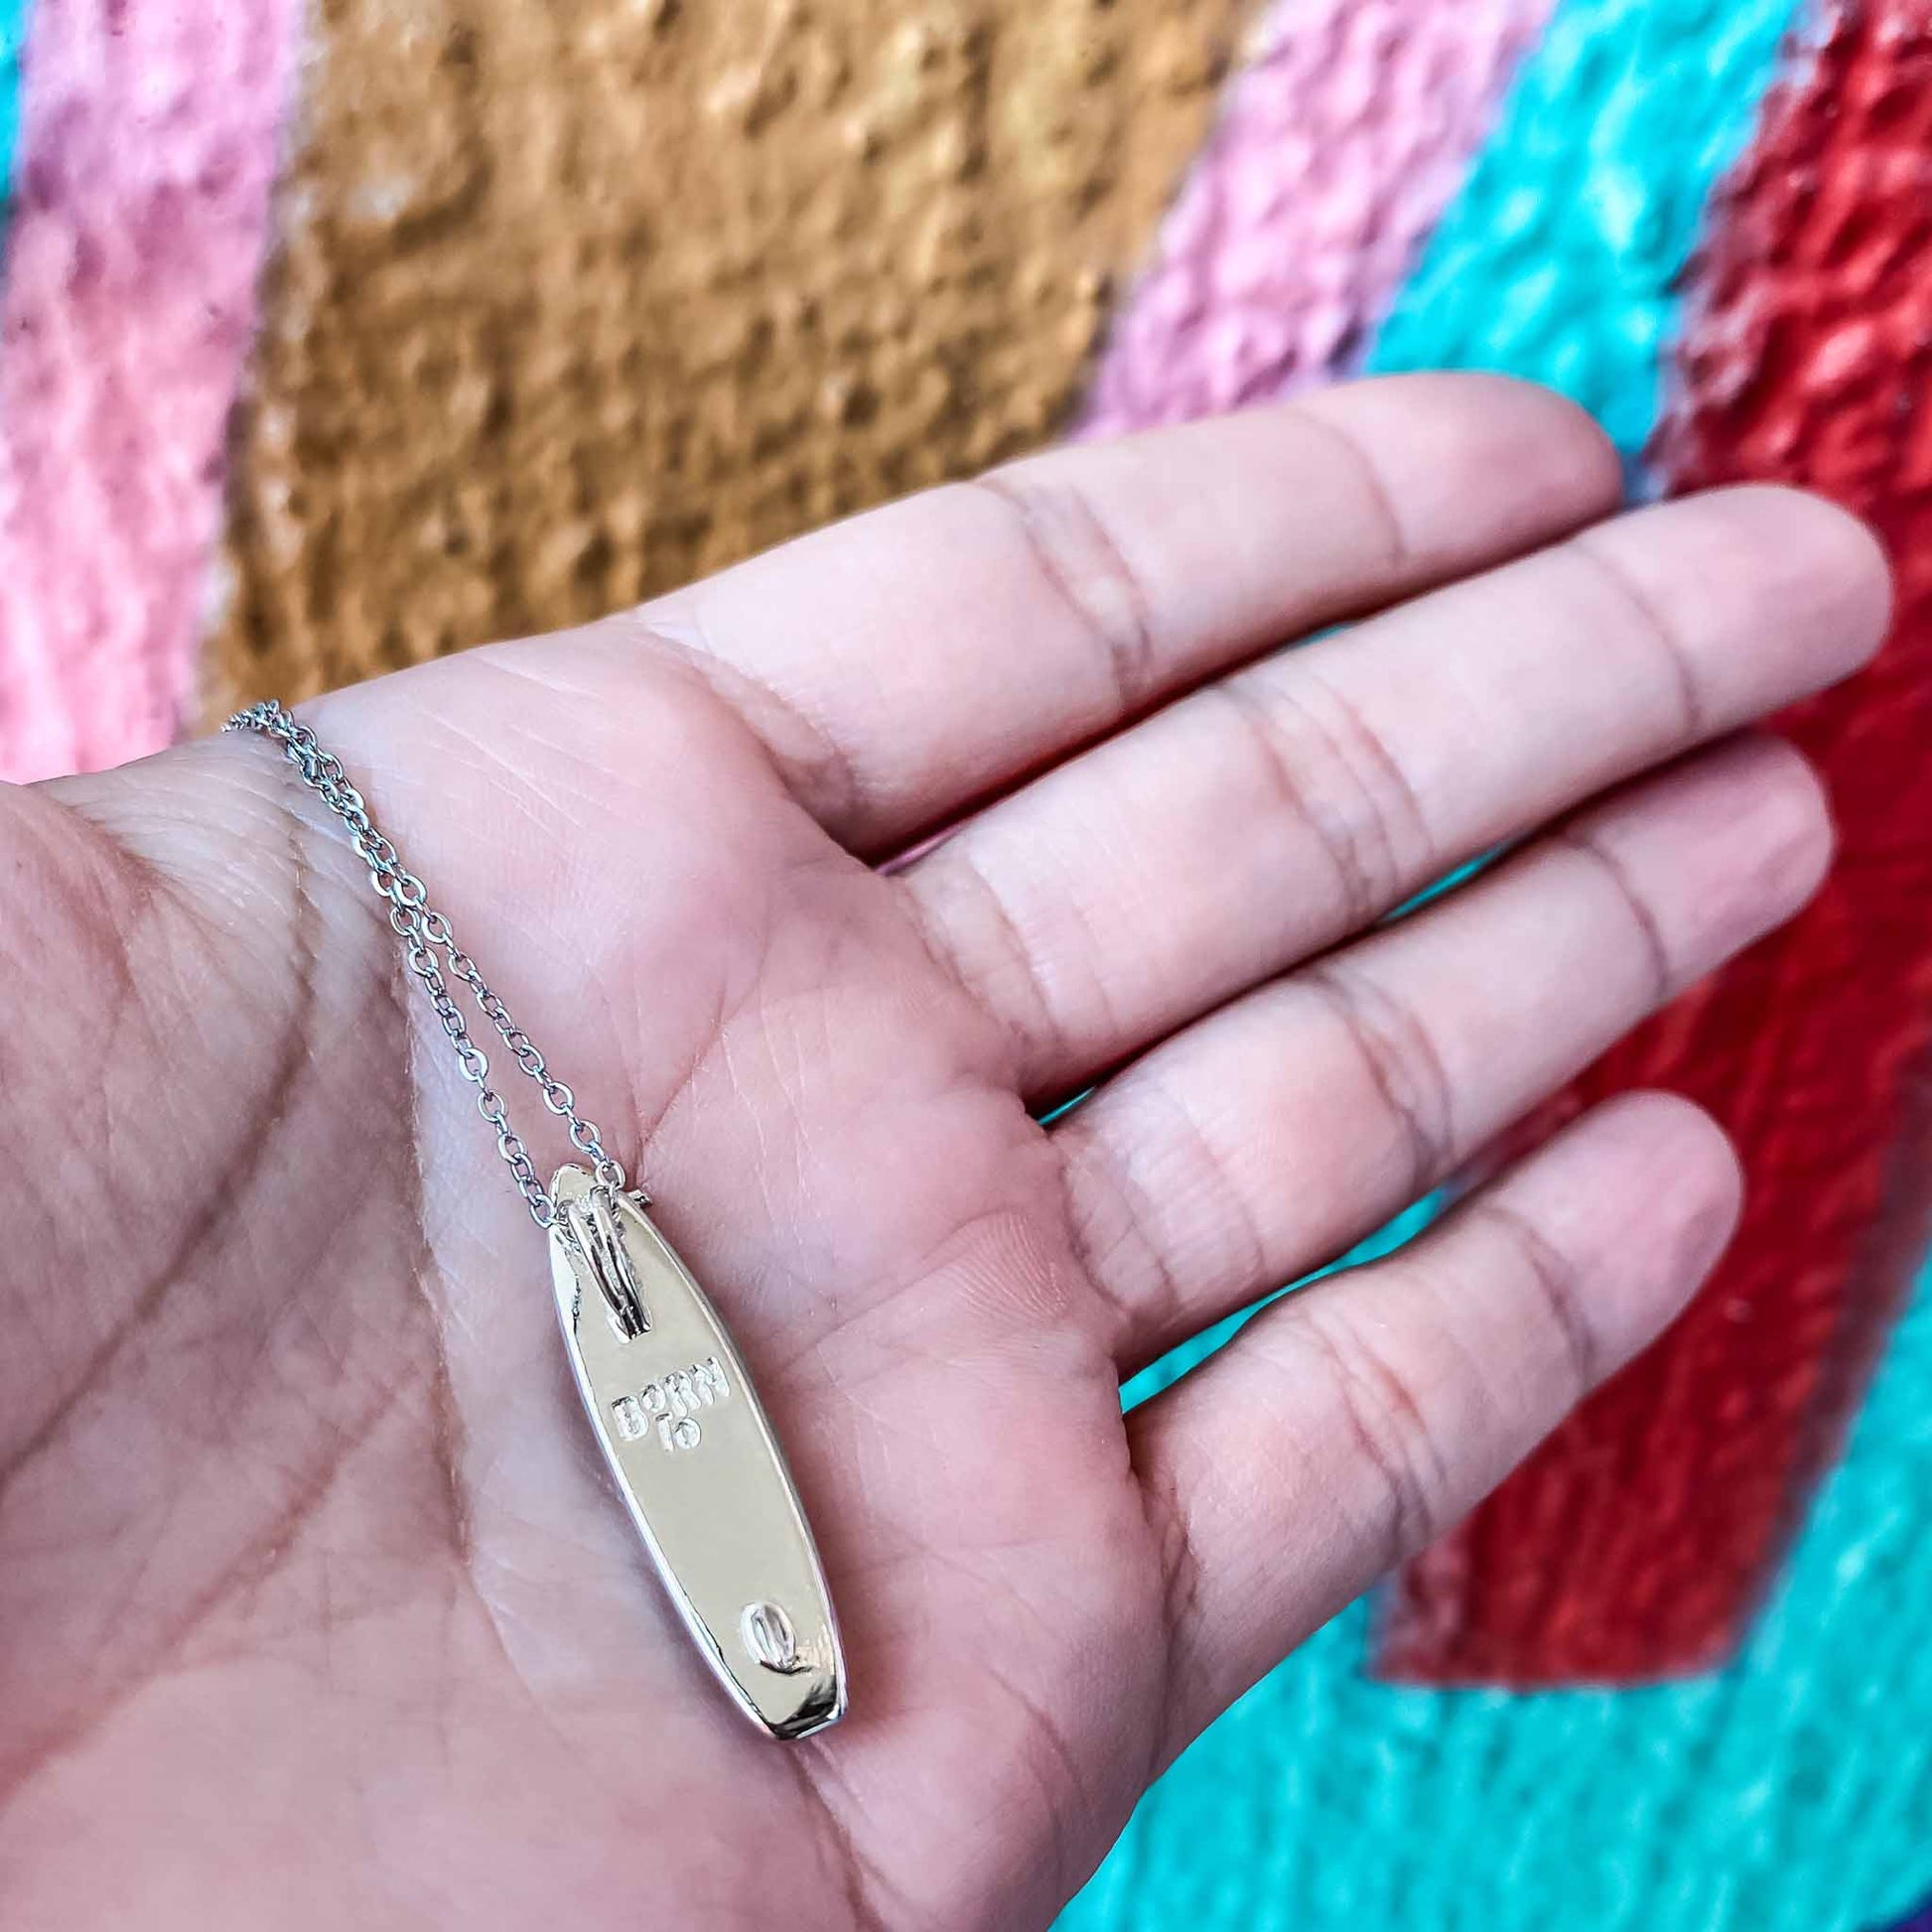 Looking for places to buy or rent a paddle board? This stand up paddle board pendant will be the best and highest performance SUP you'll ever find. Take your paddle board with you, even when you're not surfing, racing or touring. Shop June's birthstone SUP jewelry online or at a surf shop near you.